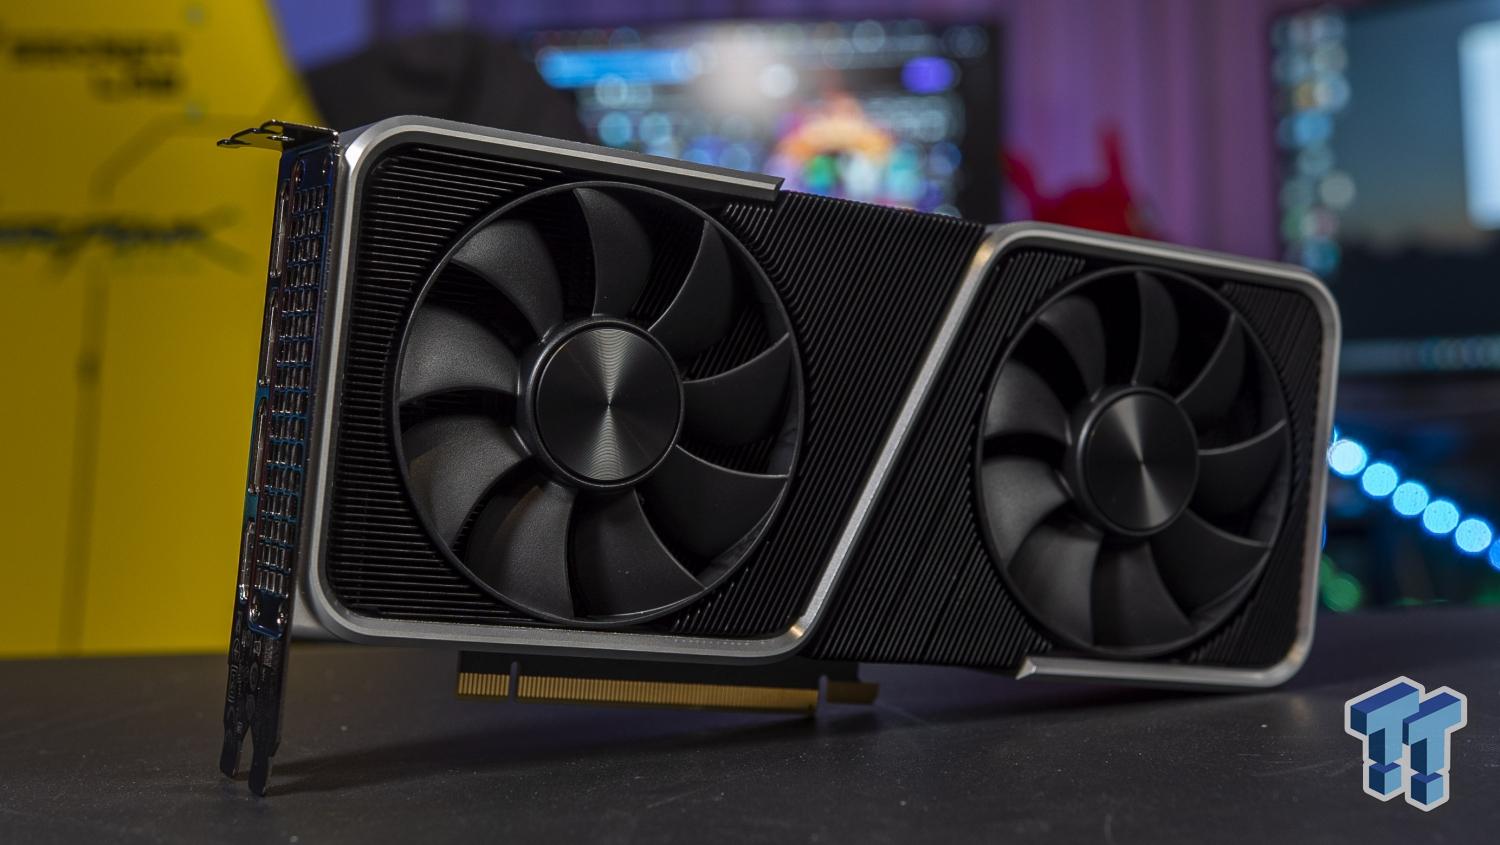 GeForce RTX 3060 Ti Coming December 2nd. Faster Than RTX 2080 SUPER, GeForce News